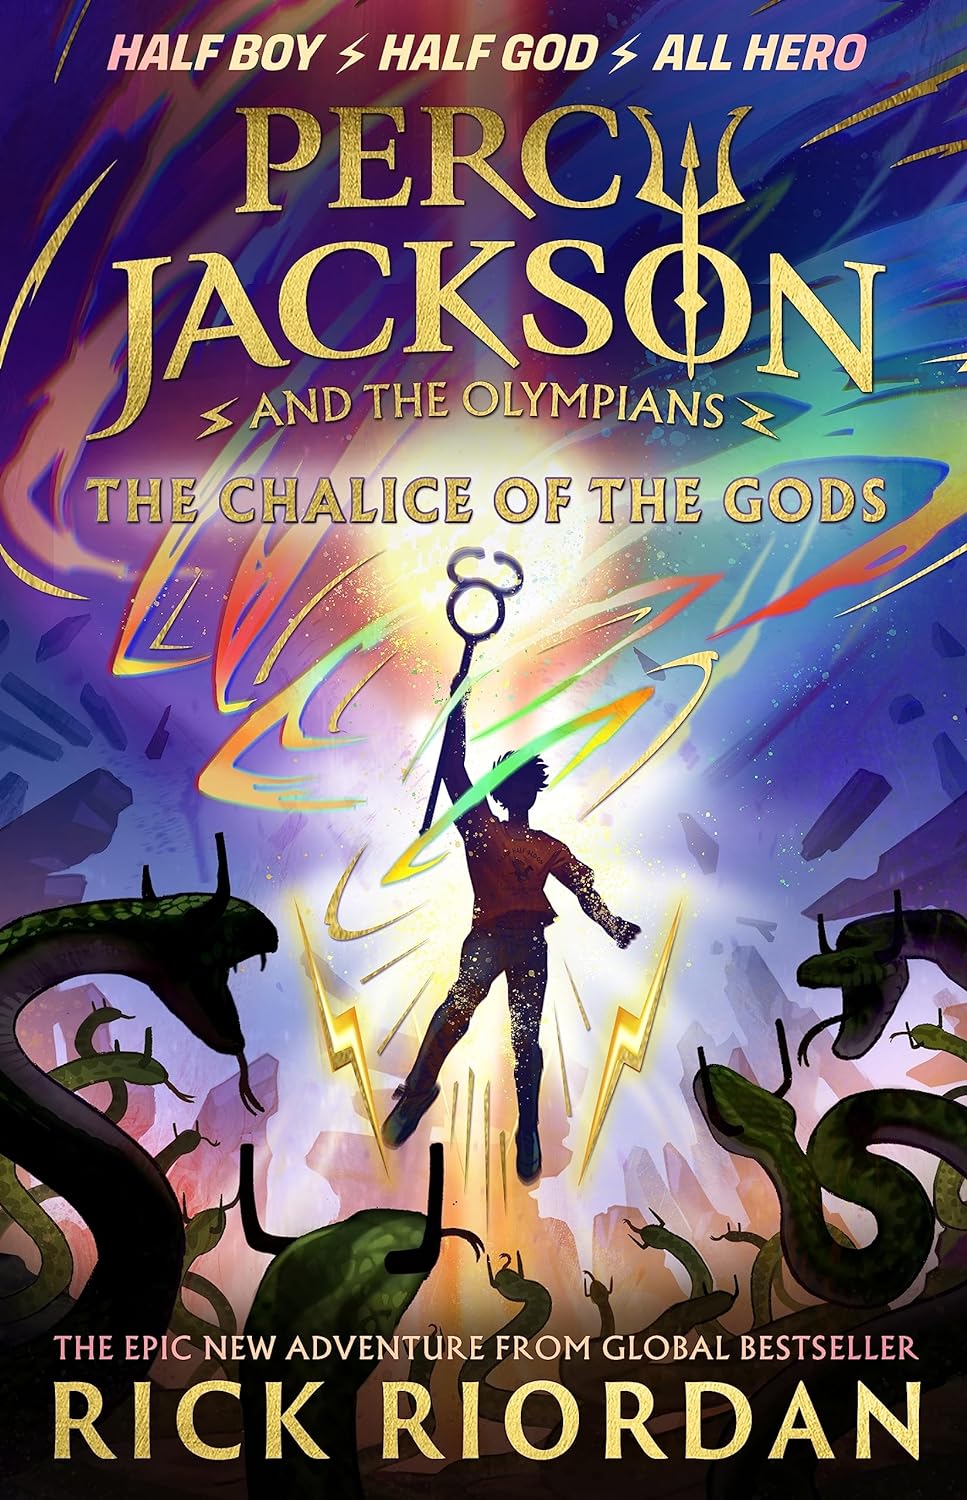 Percy Jackson and the Olympians: The Chalice of the Gods (Book 6)